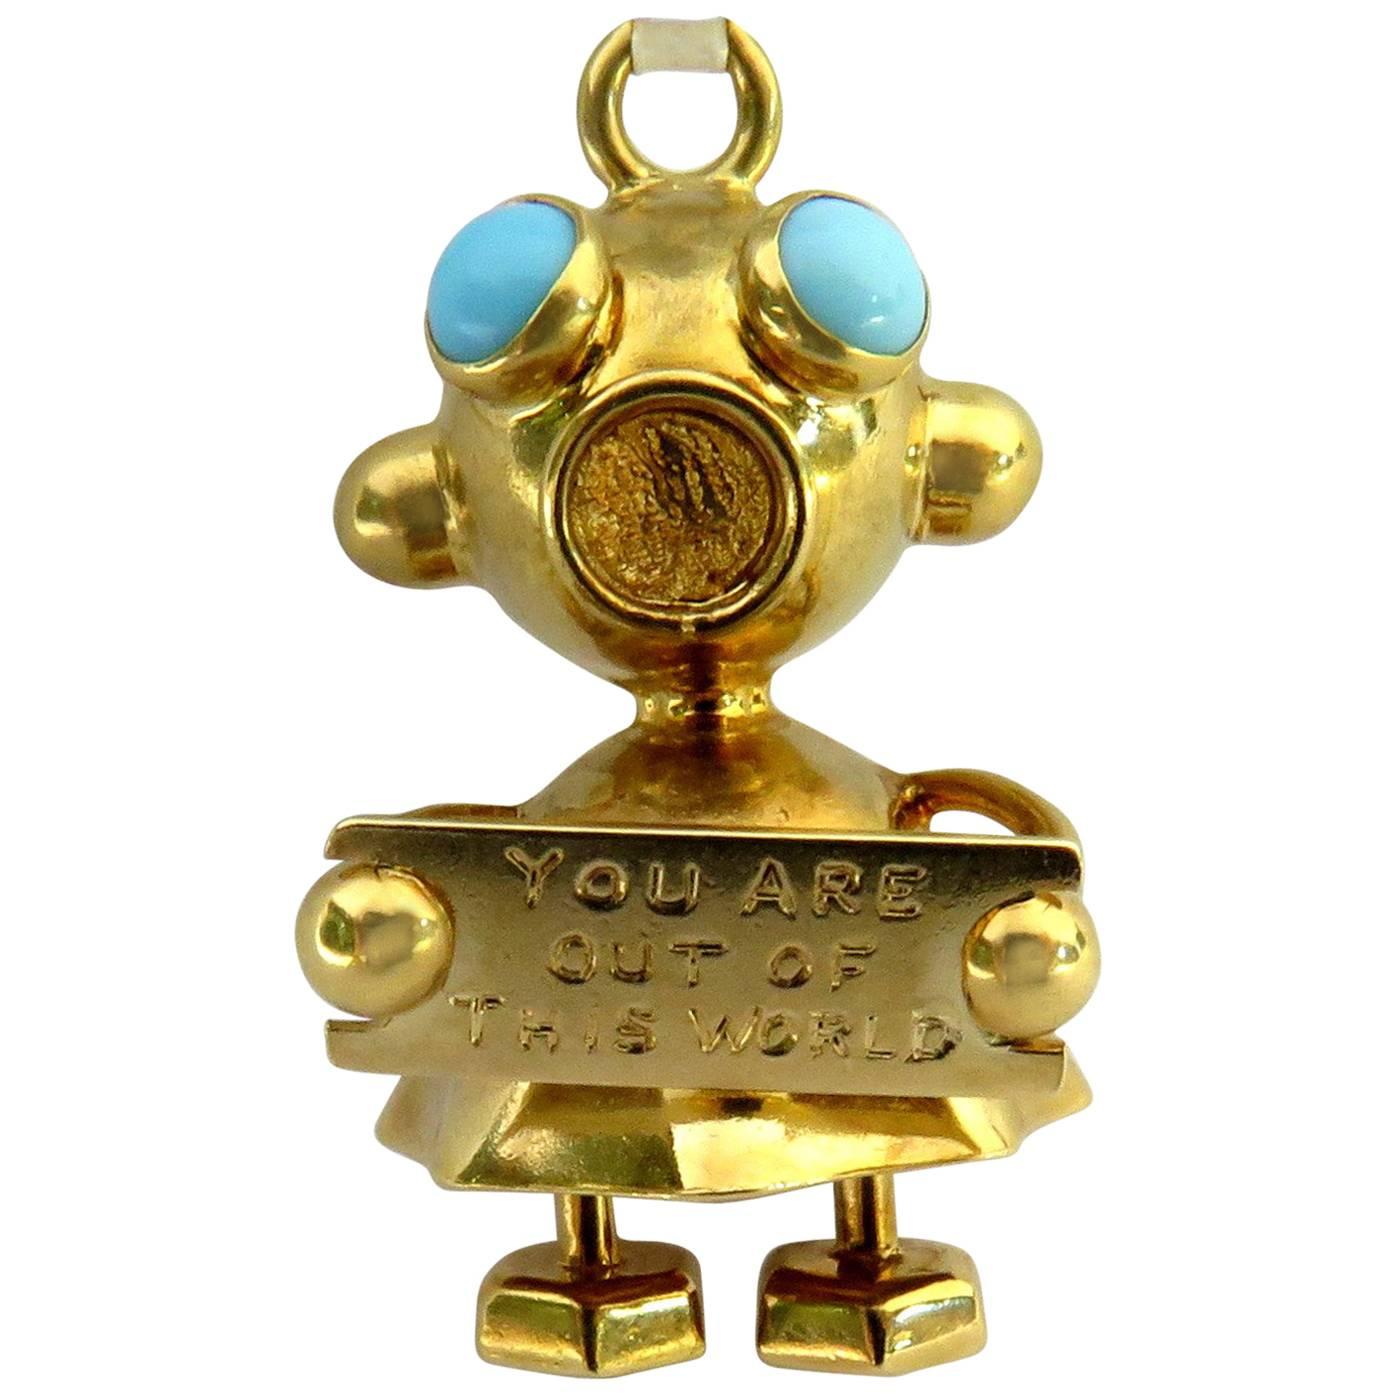 Superb Martian "You Are Out Of This World" Turquoise Gold Charm Pendant For Sale